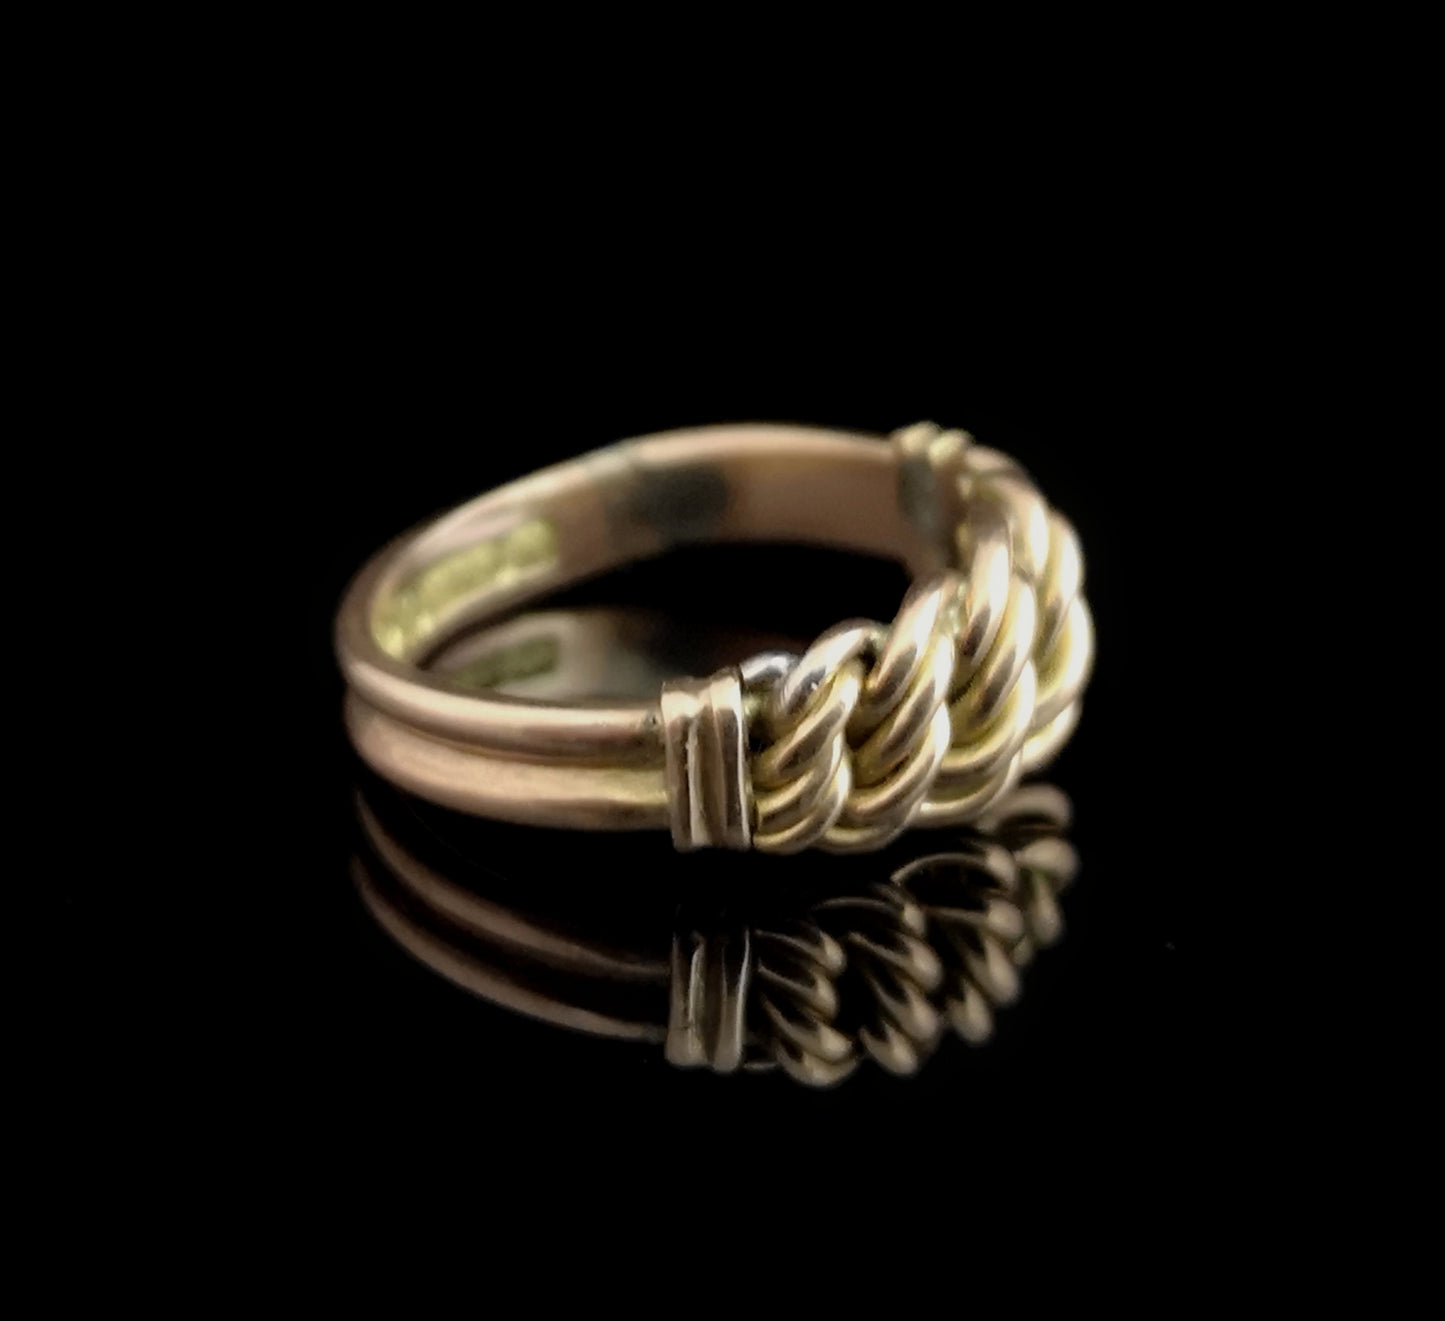 Victorian 9ct gold knot ring, keeper ring